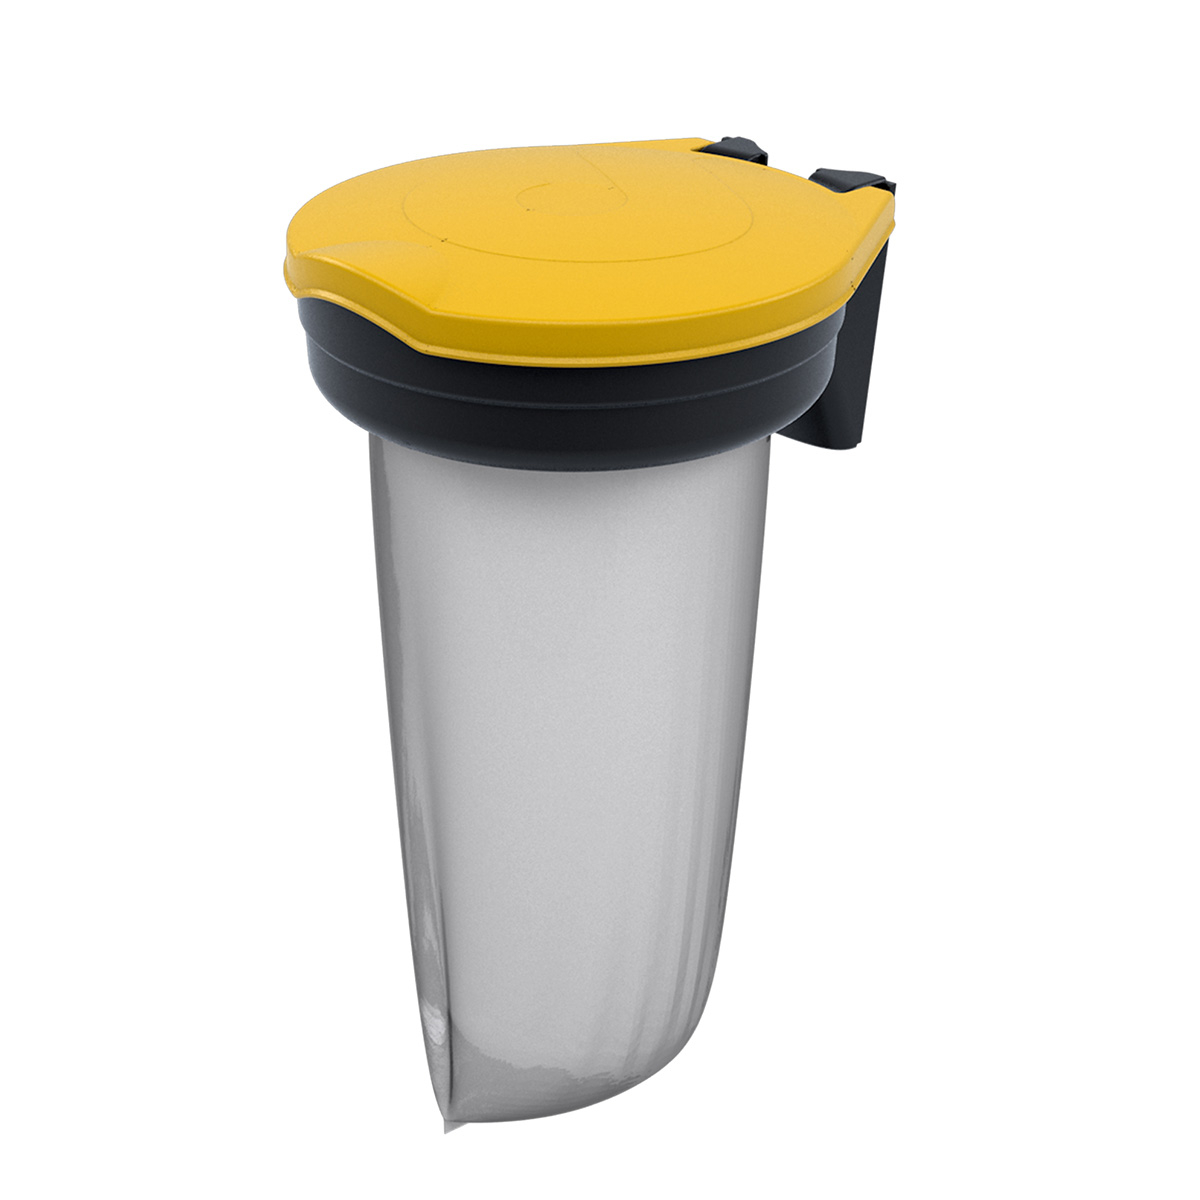 Skipper™ Barrier Recycling Bin Yellow Lid - Includes Stickers For Labelling Waste Options 